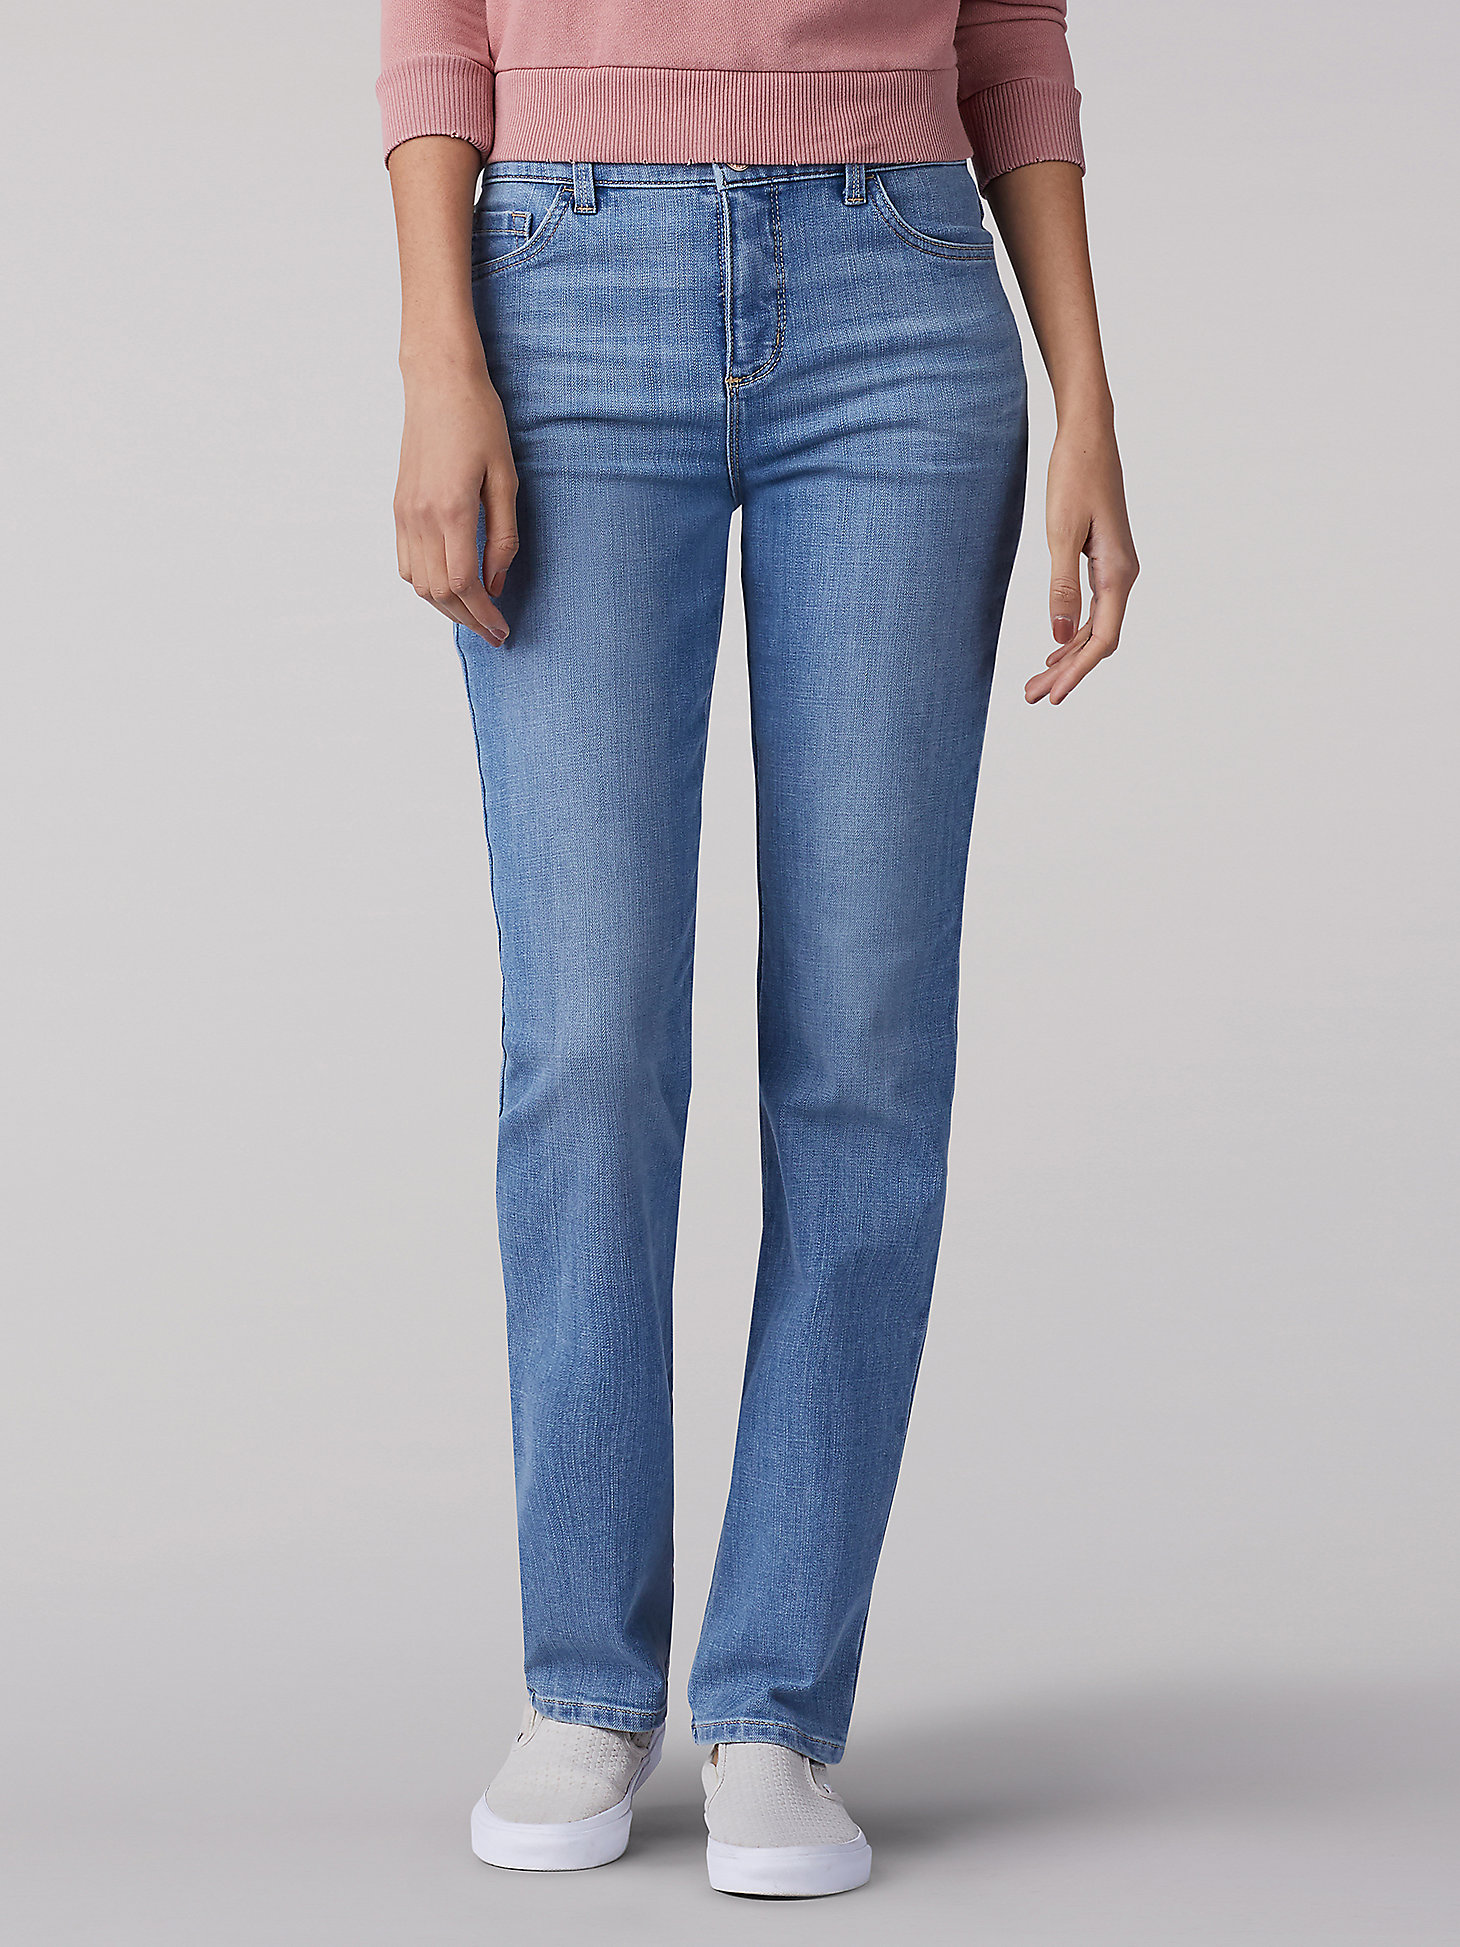 Women’s Instantly Slims Relaxed Fit Straight Leg Jean Classic Fit in Inspire Blue main view